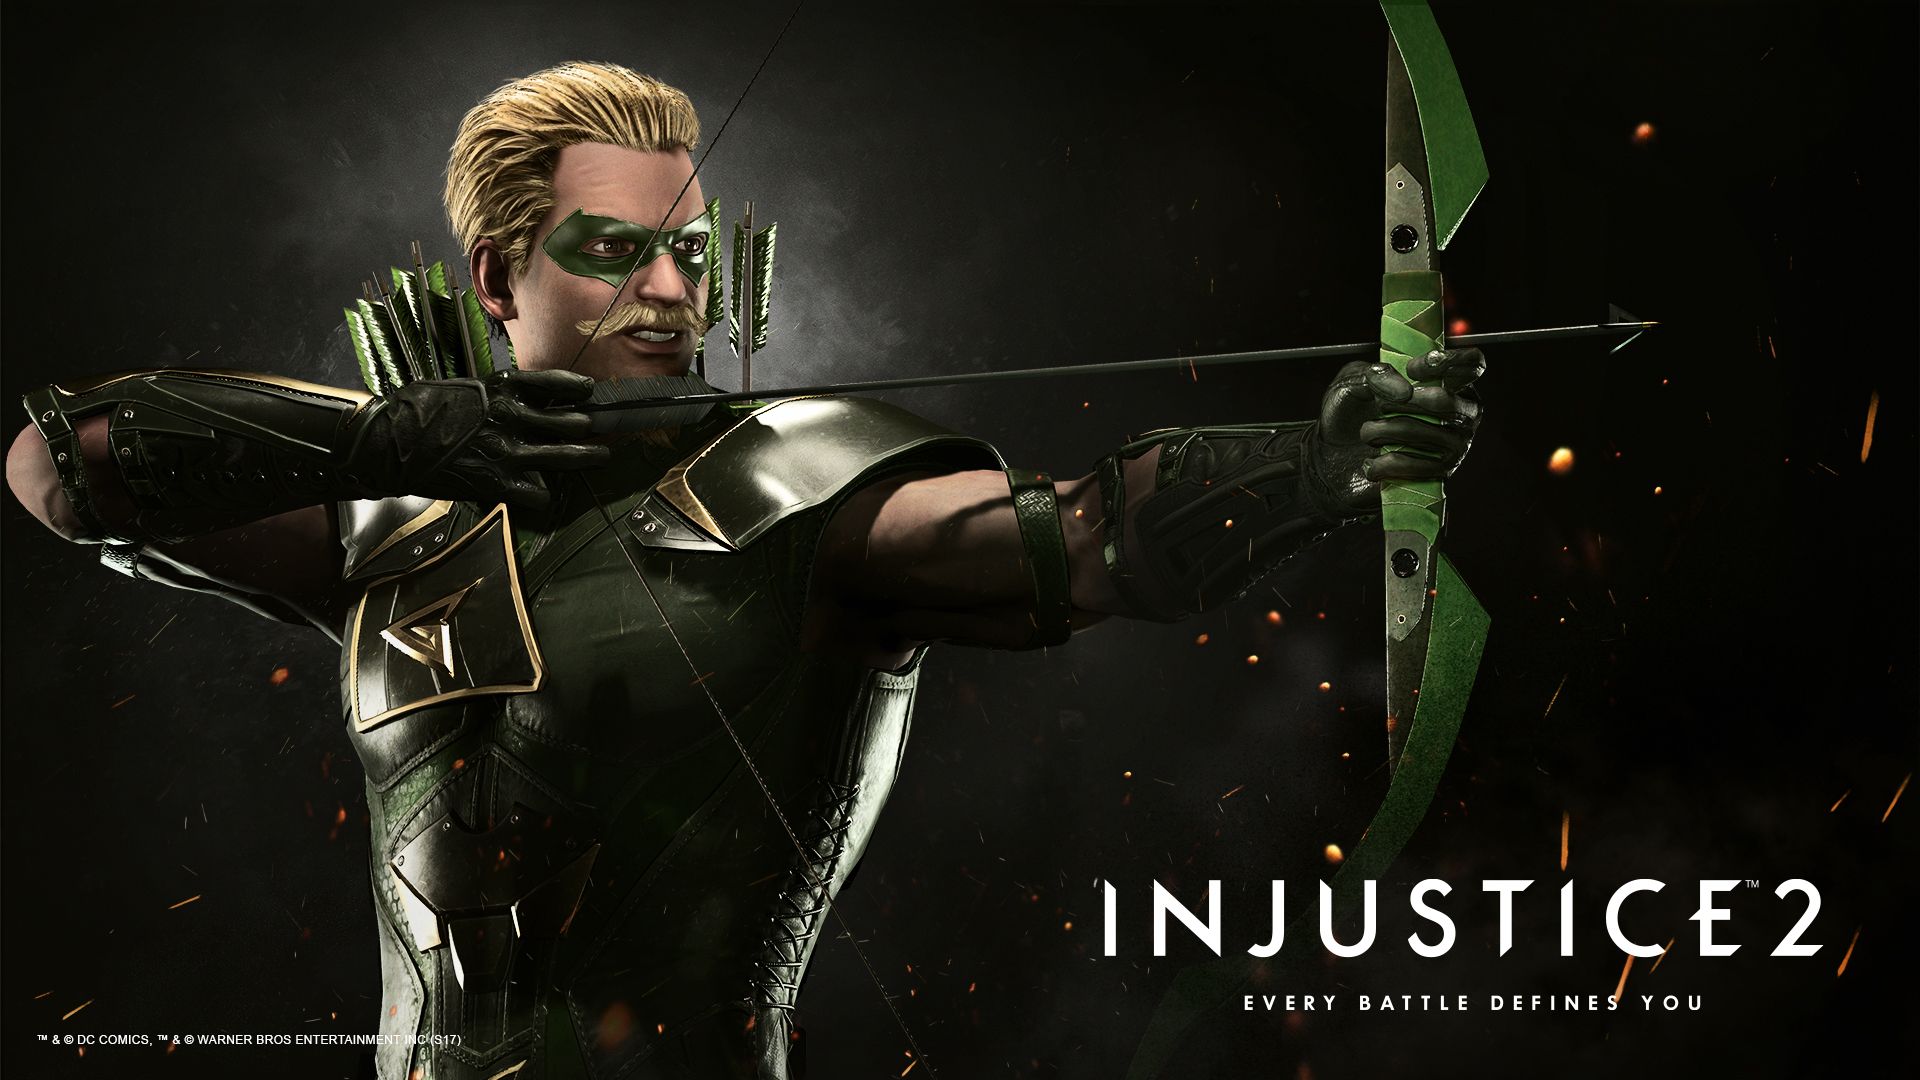 green arrow wallpaper,pc game,fictional character,action adventure game,movie,bow and arrow